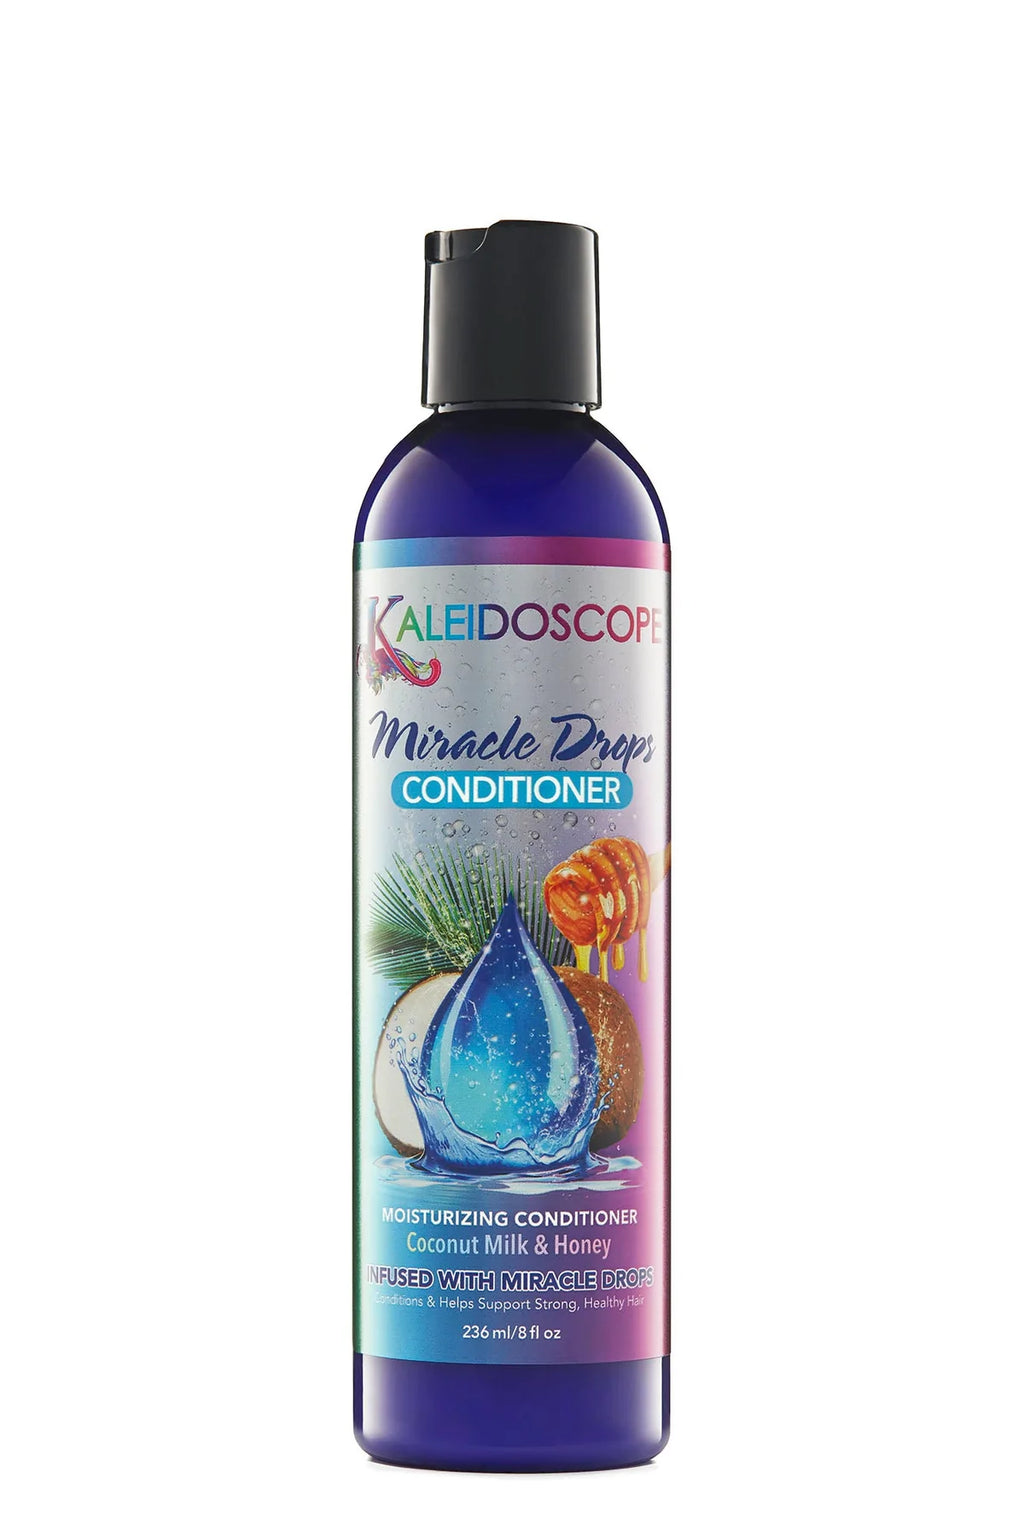 Kaleidoscope Miracle Drops Conditioner 8oz